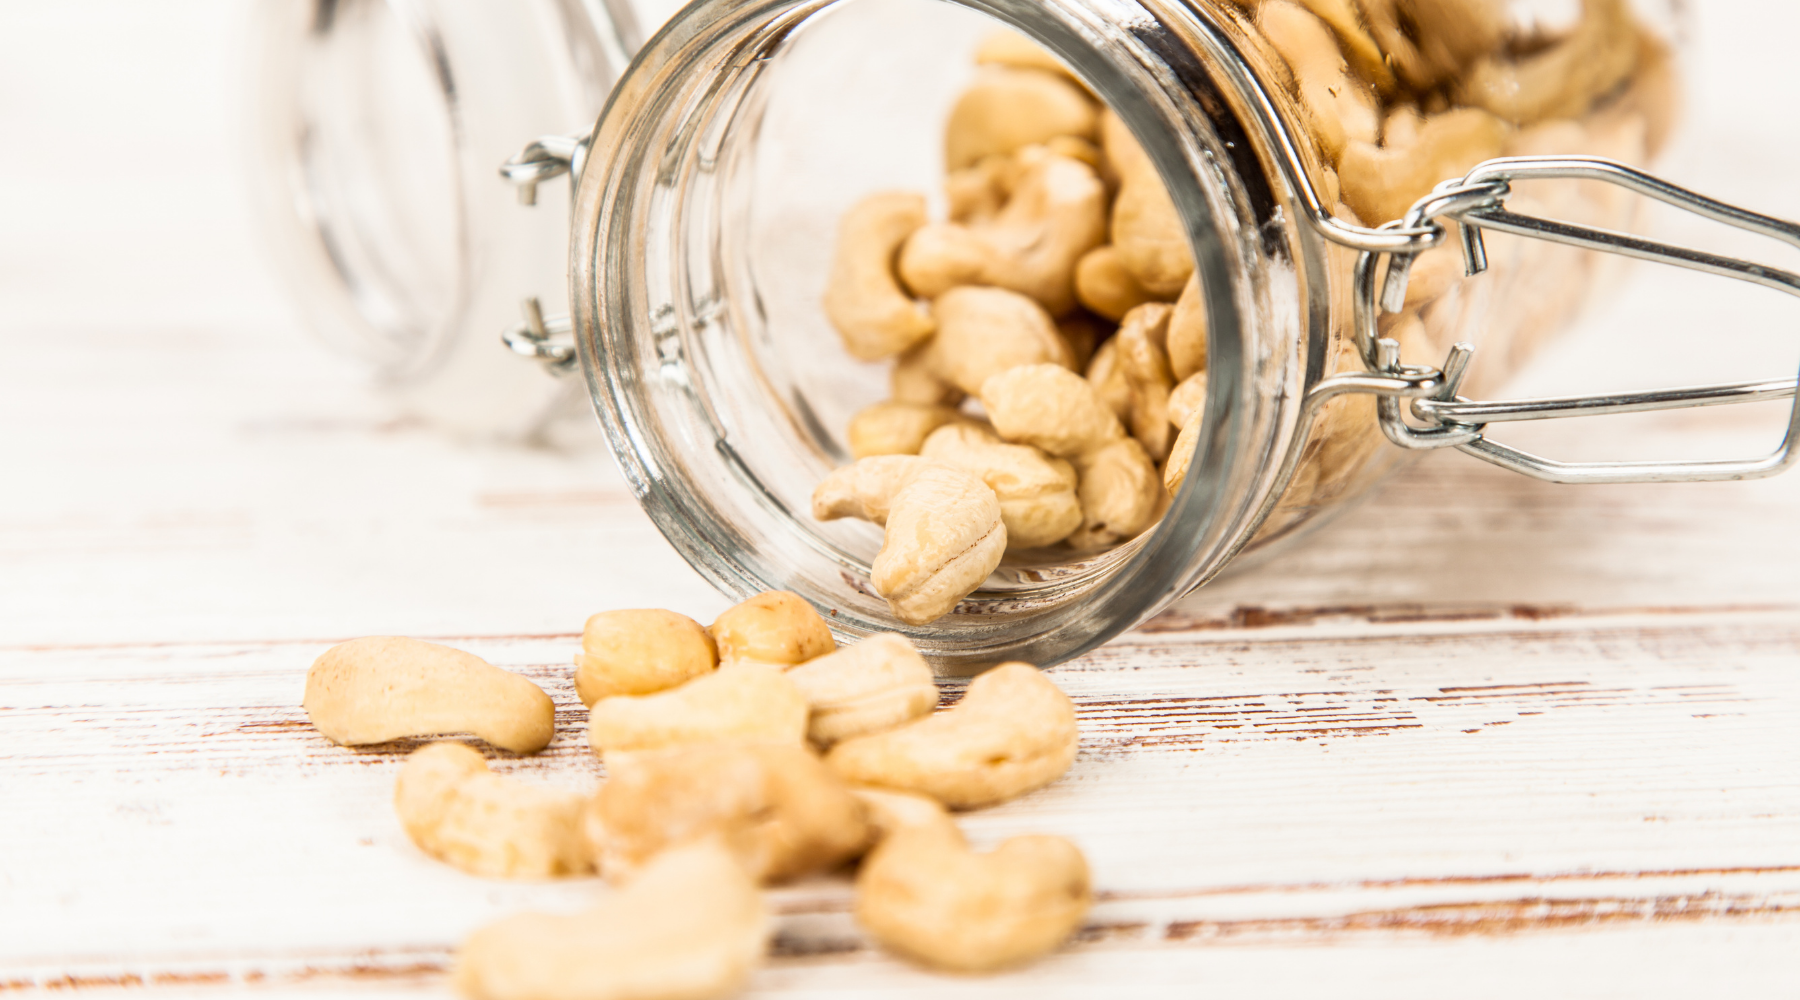 THE TOP 7 HEALTH BENEFITS OF CASHEW NUTS